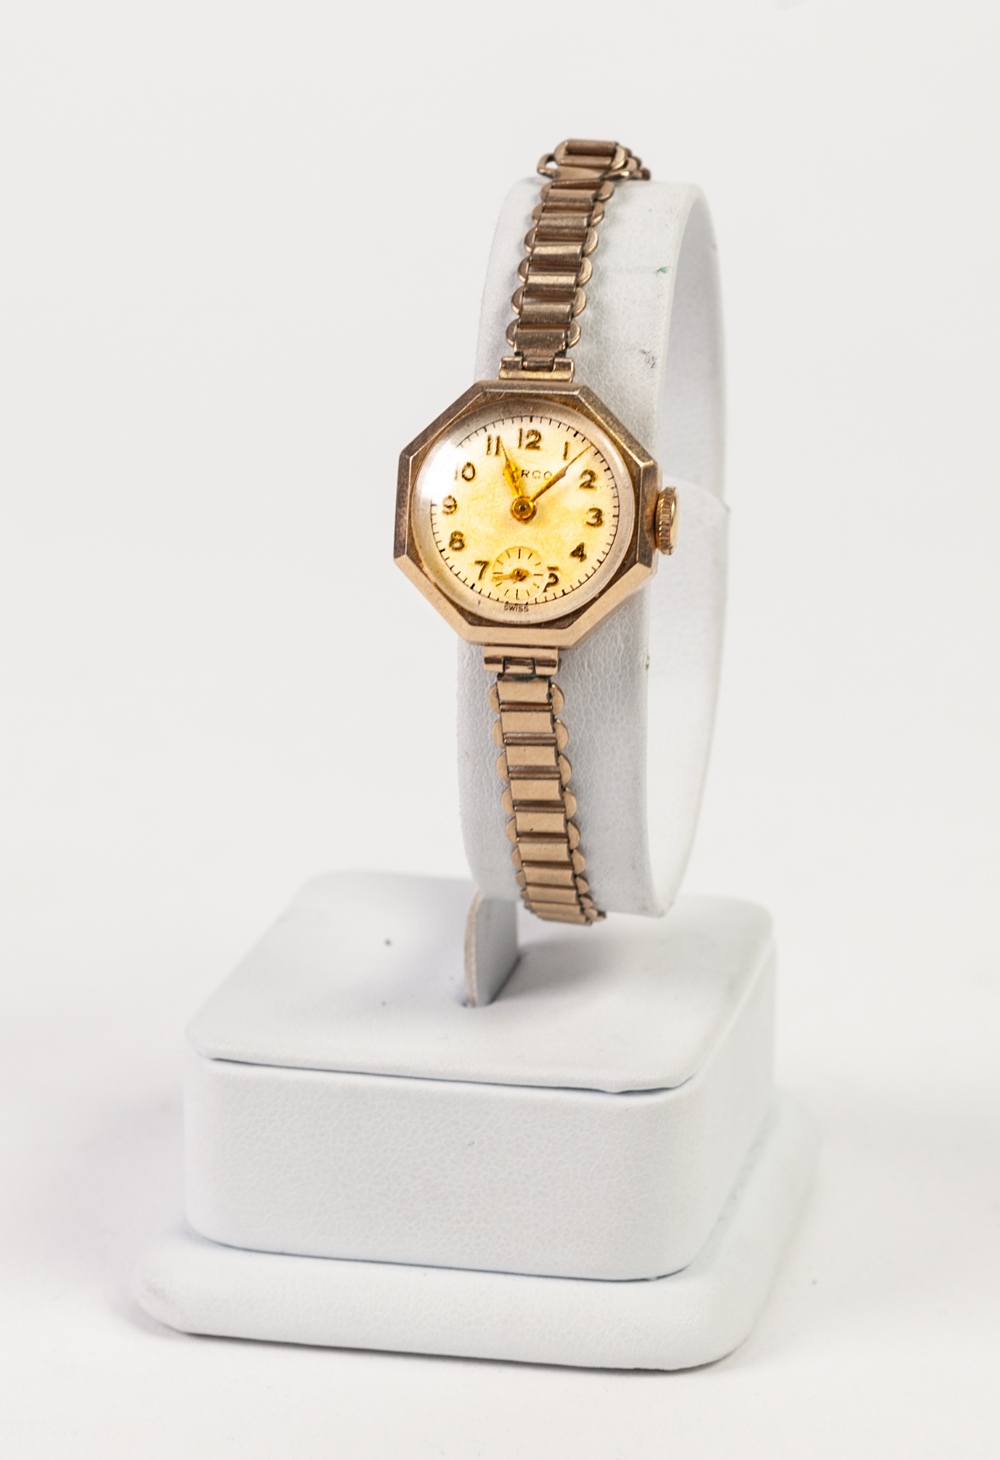 LADY'S HIRCO SWISS WRIST WATCH, with 15 jewels movement, circular silvered dial with applied gold